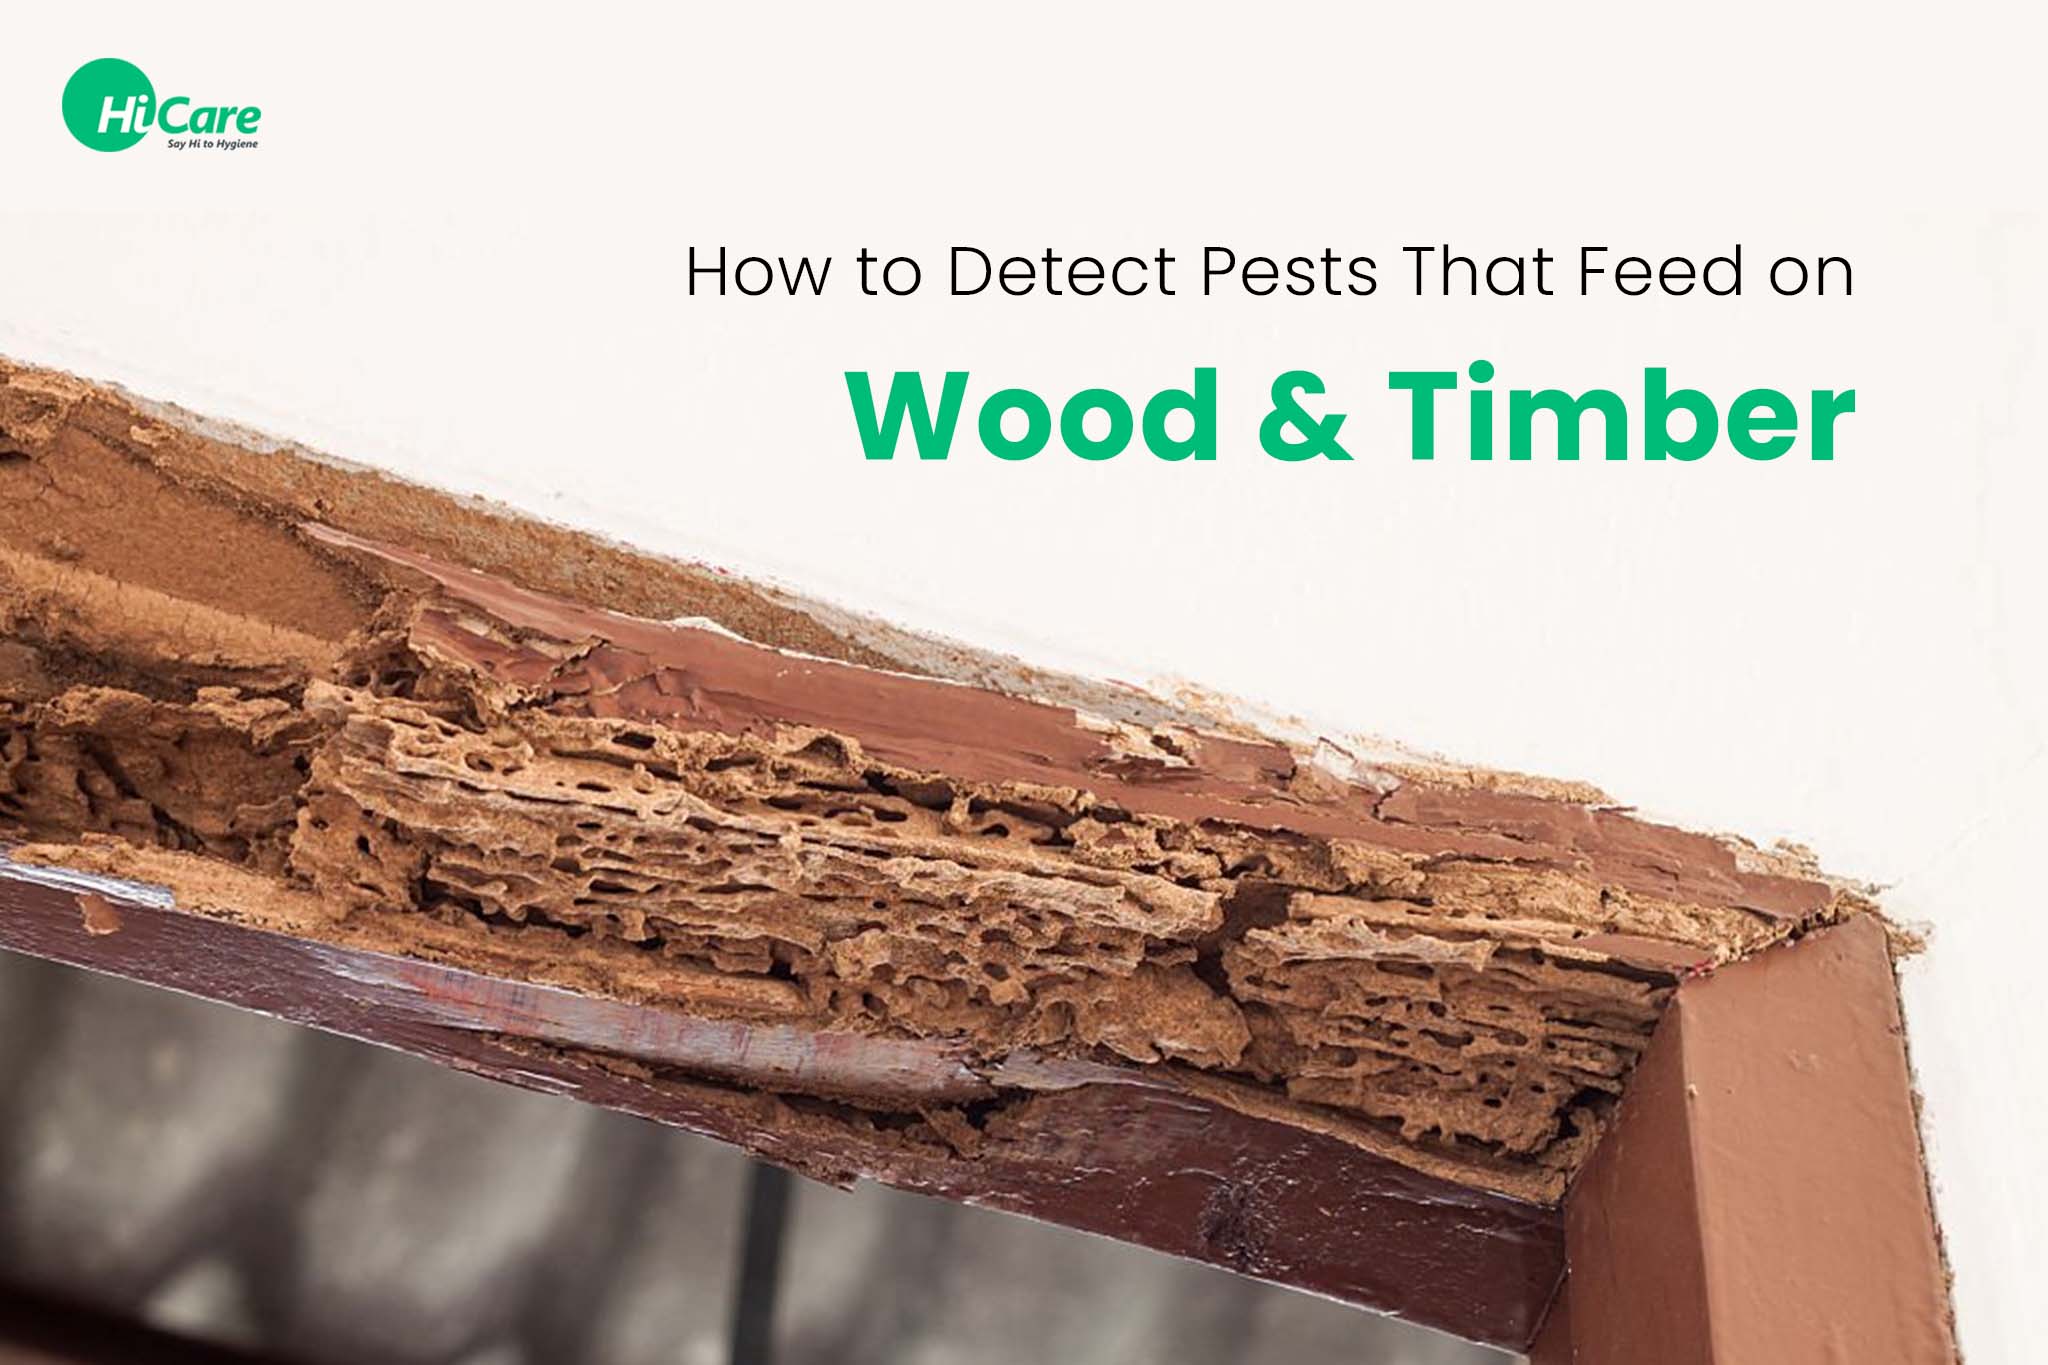 How to detect Pests and Treat Wood Borer Infestation?